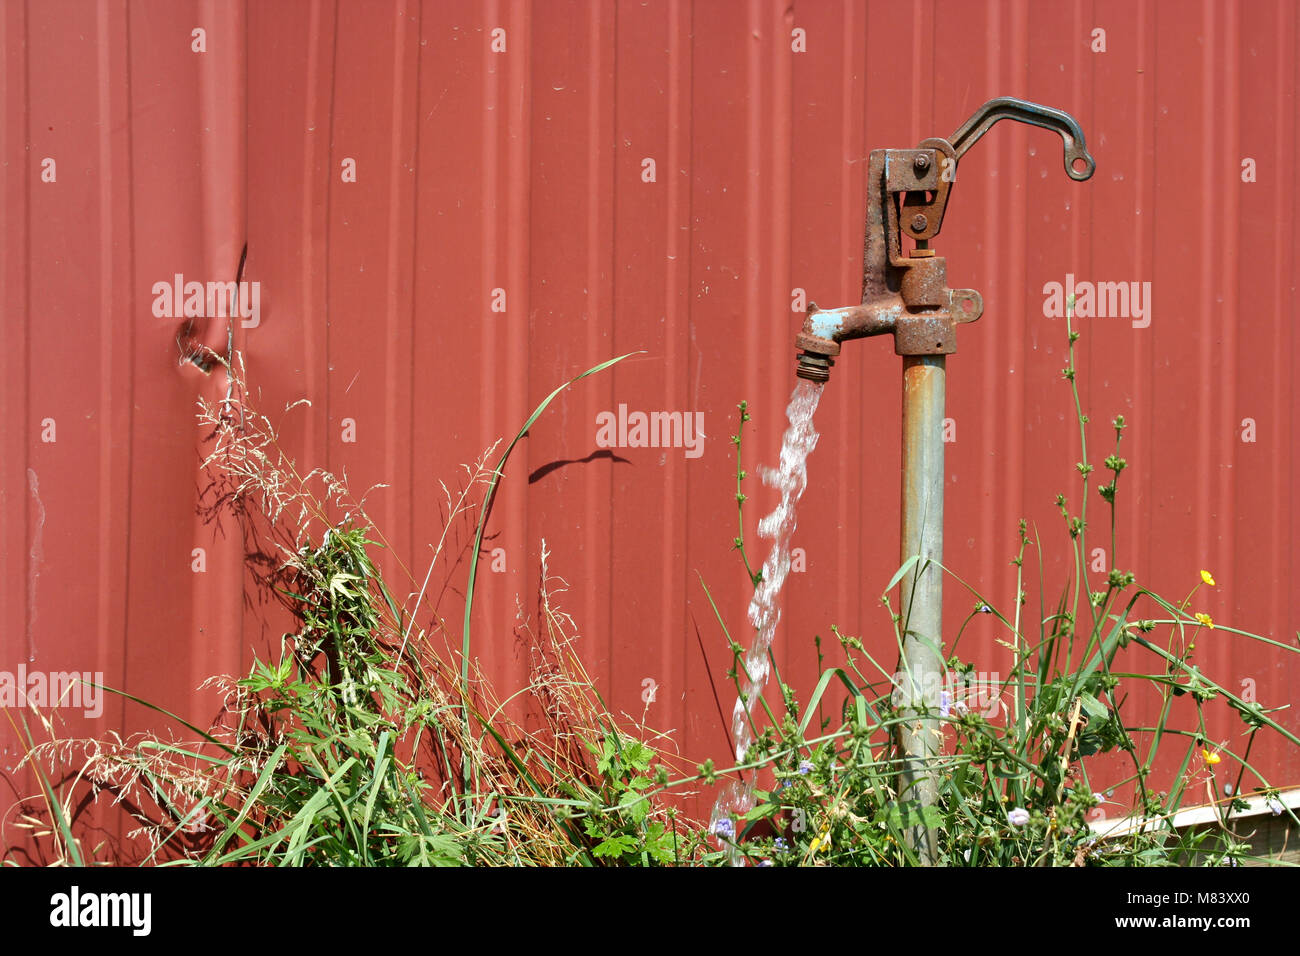 A Old water spigot with running water Stock Photo